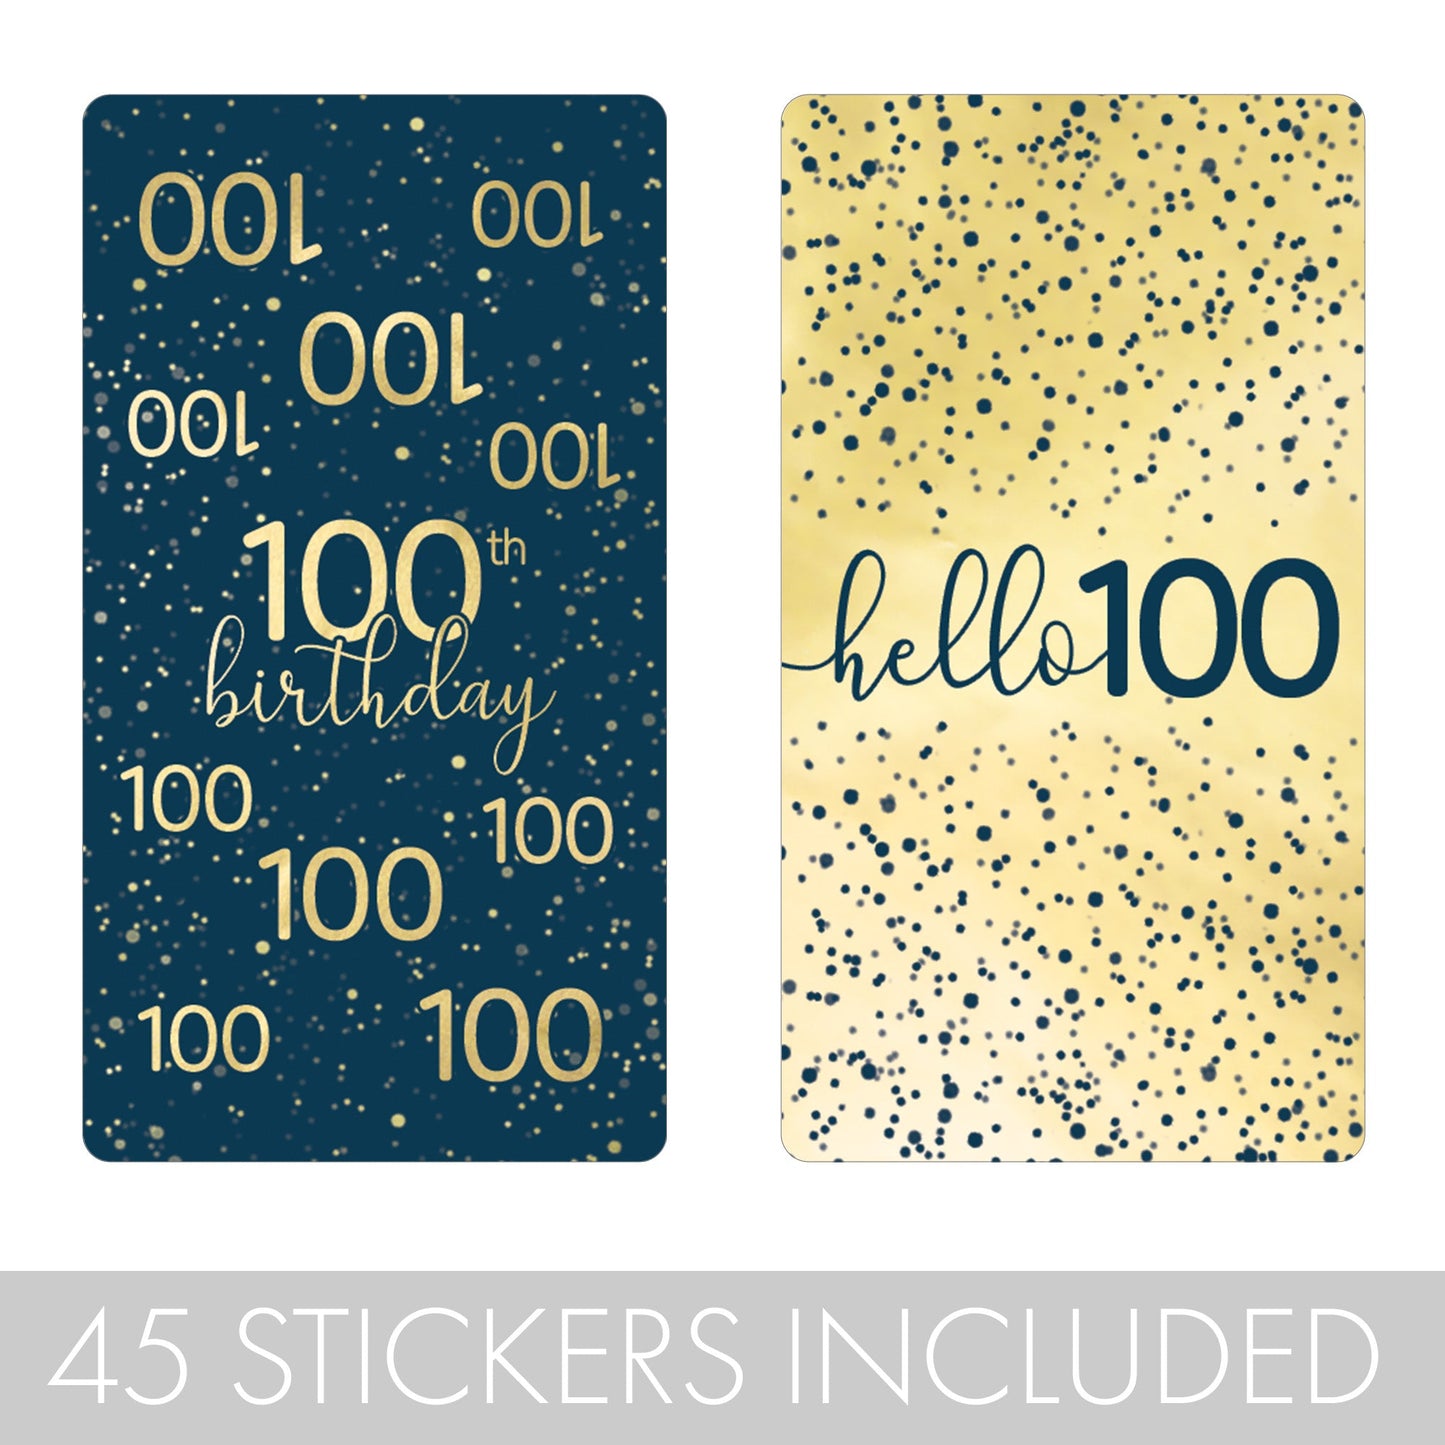 Small candy bar wrappers decorated with navy blue and gold colors